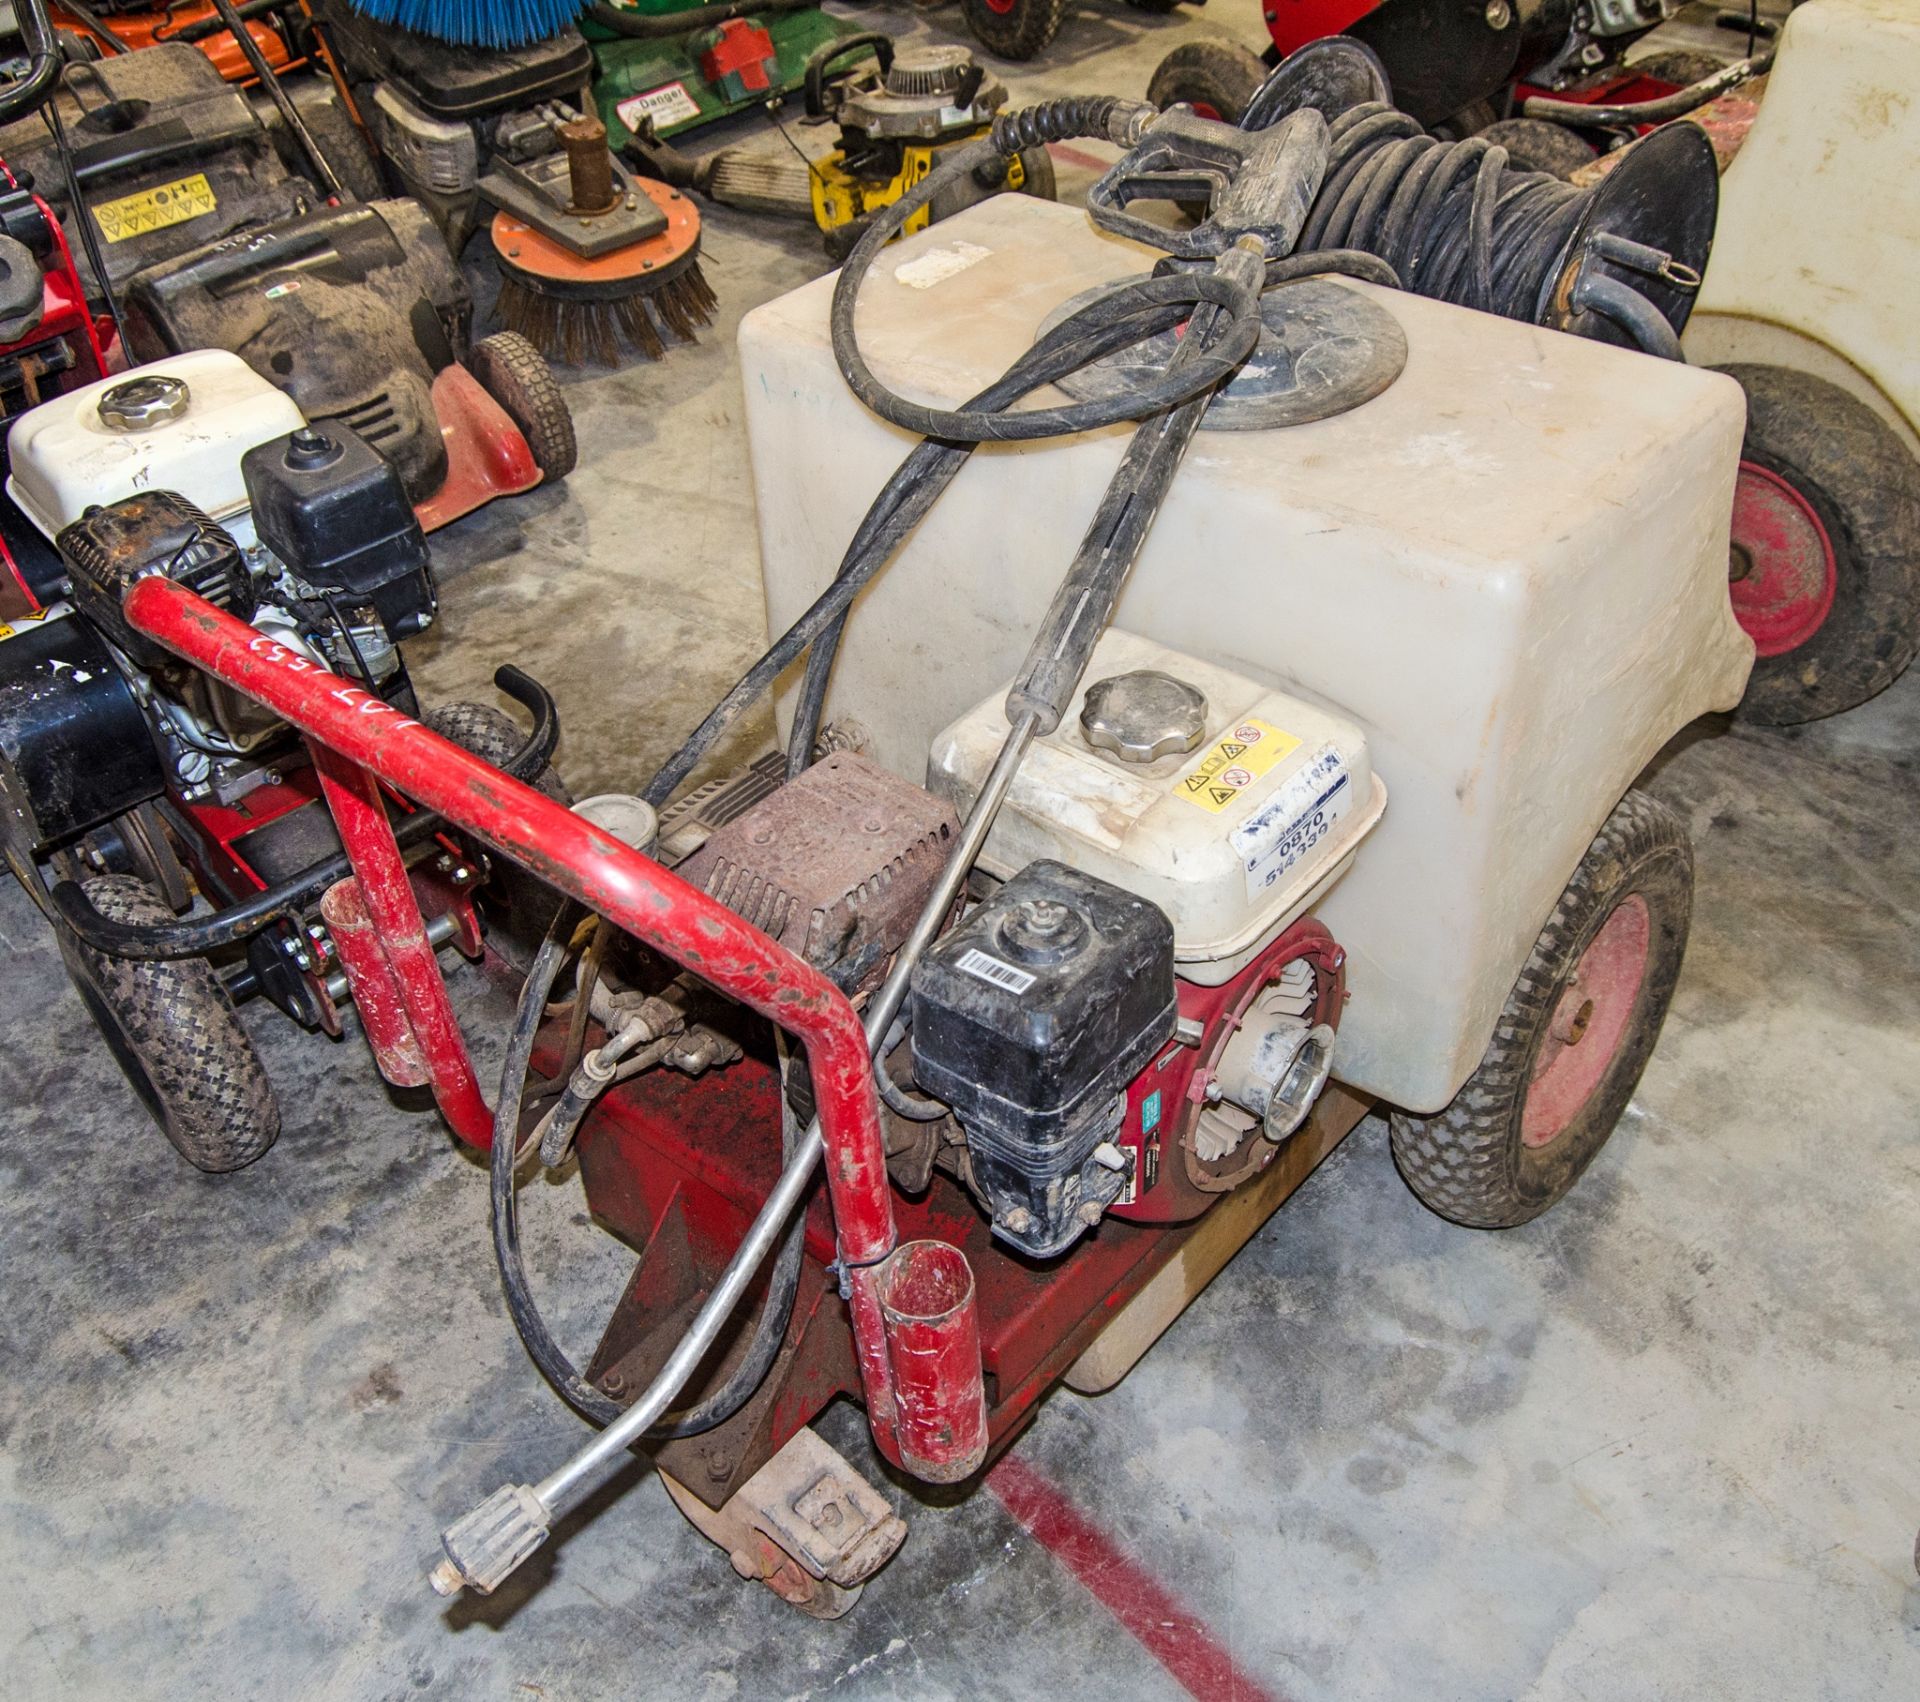 Petrol driven bowser pressure washer c/w hose and lance ** Pull cord assembly missing ** 08096081 - Image 2 of 3